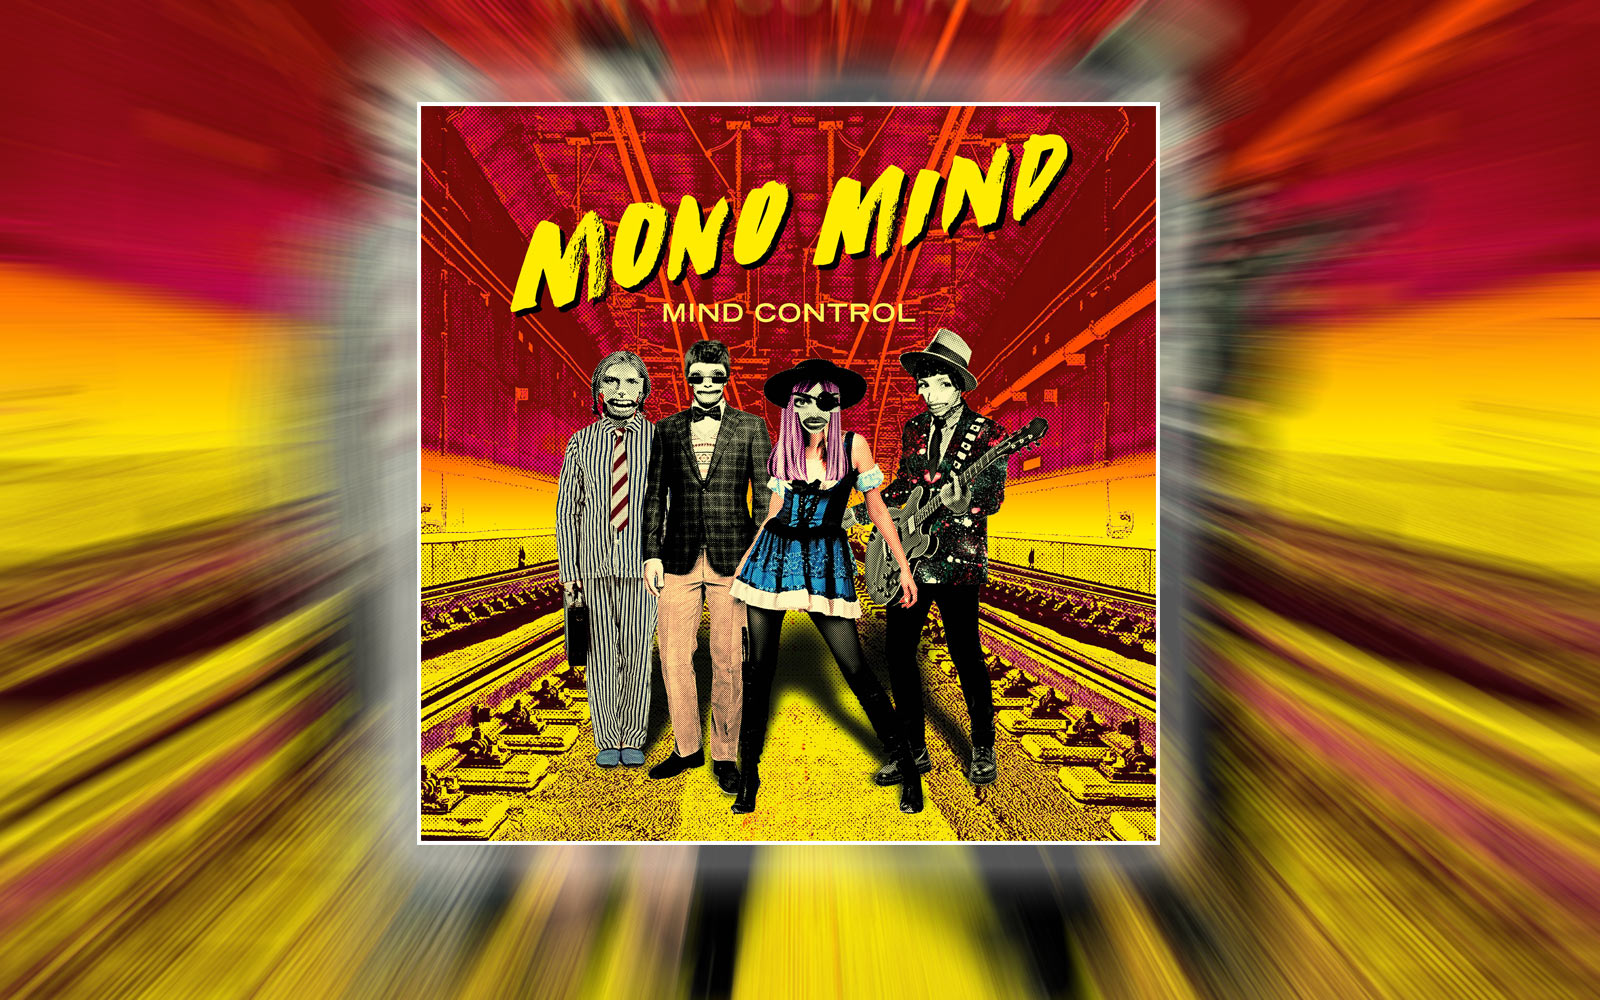 ashley power recommends Mind Control Archive